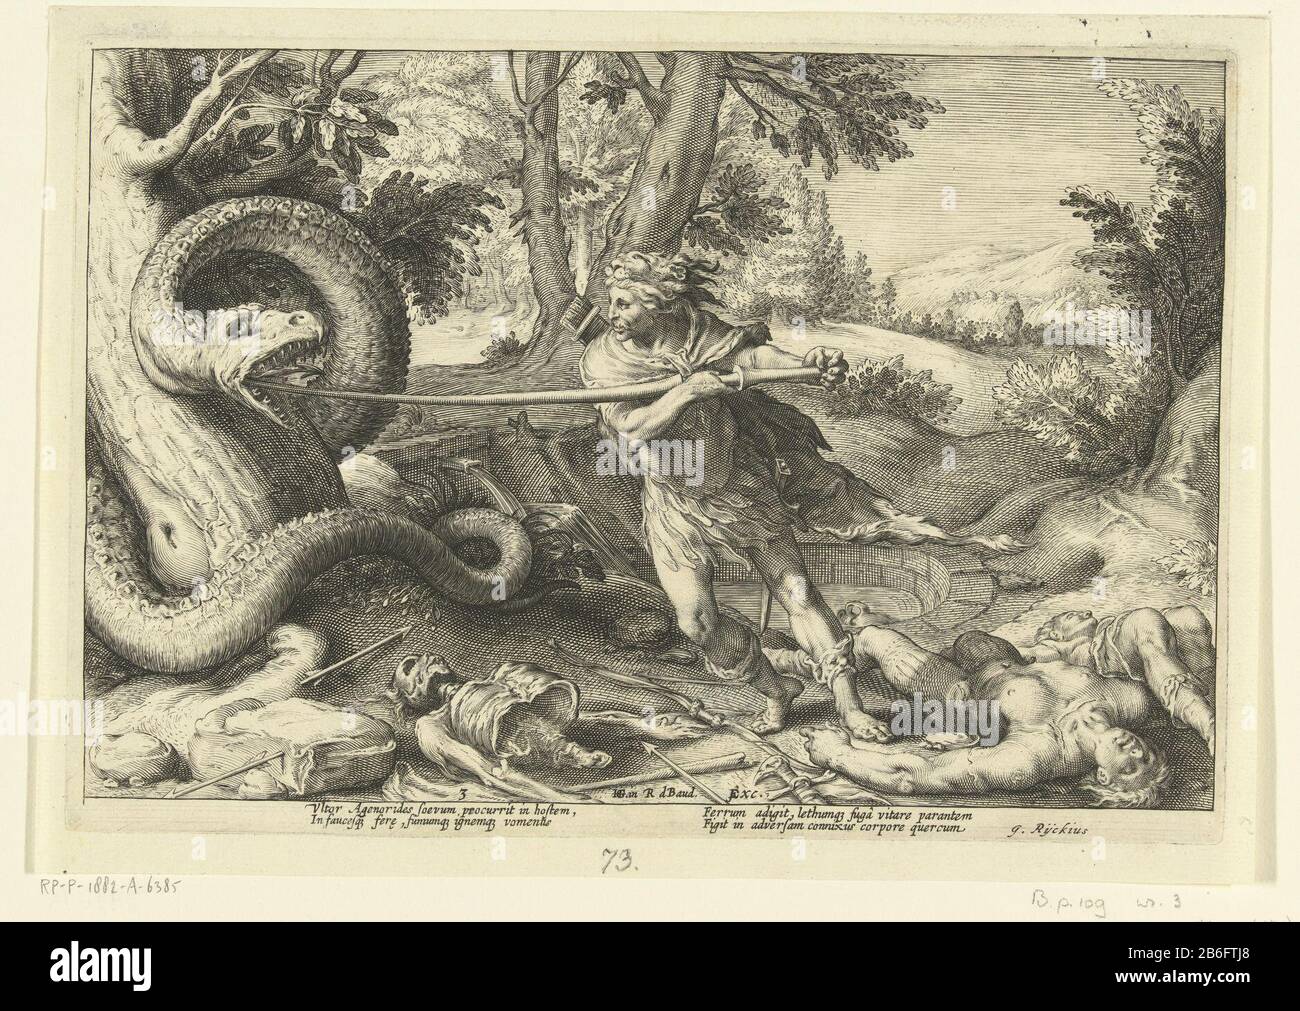 Cadmus kills the dragon Ovid 'Metamorphoses (series title) Cadmus kills the dragon that devoured his companions. Among the show twice two lines of Latin text. This print is part of a series of 52 prints that depict stories from Ovid's Metamorphoses. This series is divided into three numbered series: two of 20 prints and one of 12 prints. This picture belongs to the third reeks. Manufacturer : printmaker: Hendrick Goltzius (studio) printmaker Robert Baudous the (studio) to design: Hendrick Goltzius (listed property) writer G. Rijckius (listed building) publisher: Robert de Baudous (listed prope Stock Photo